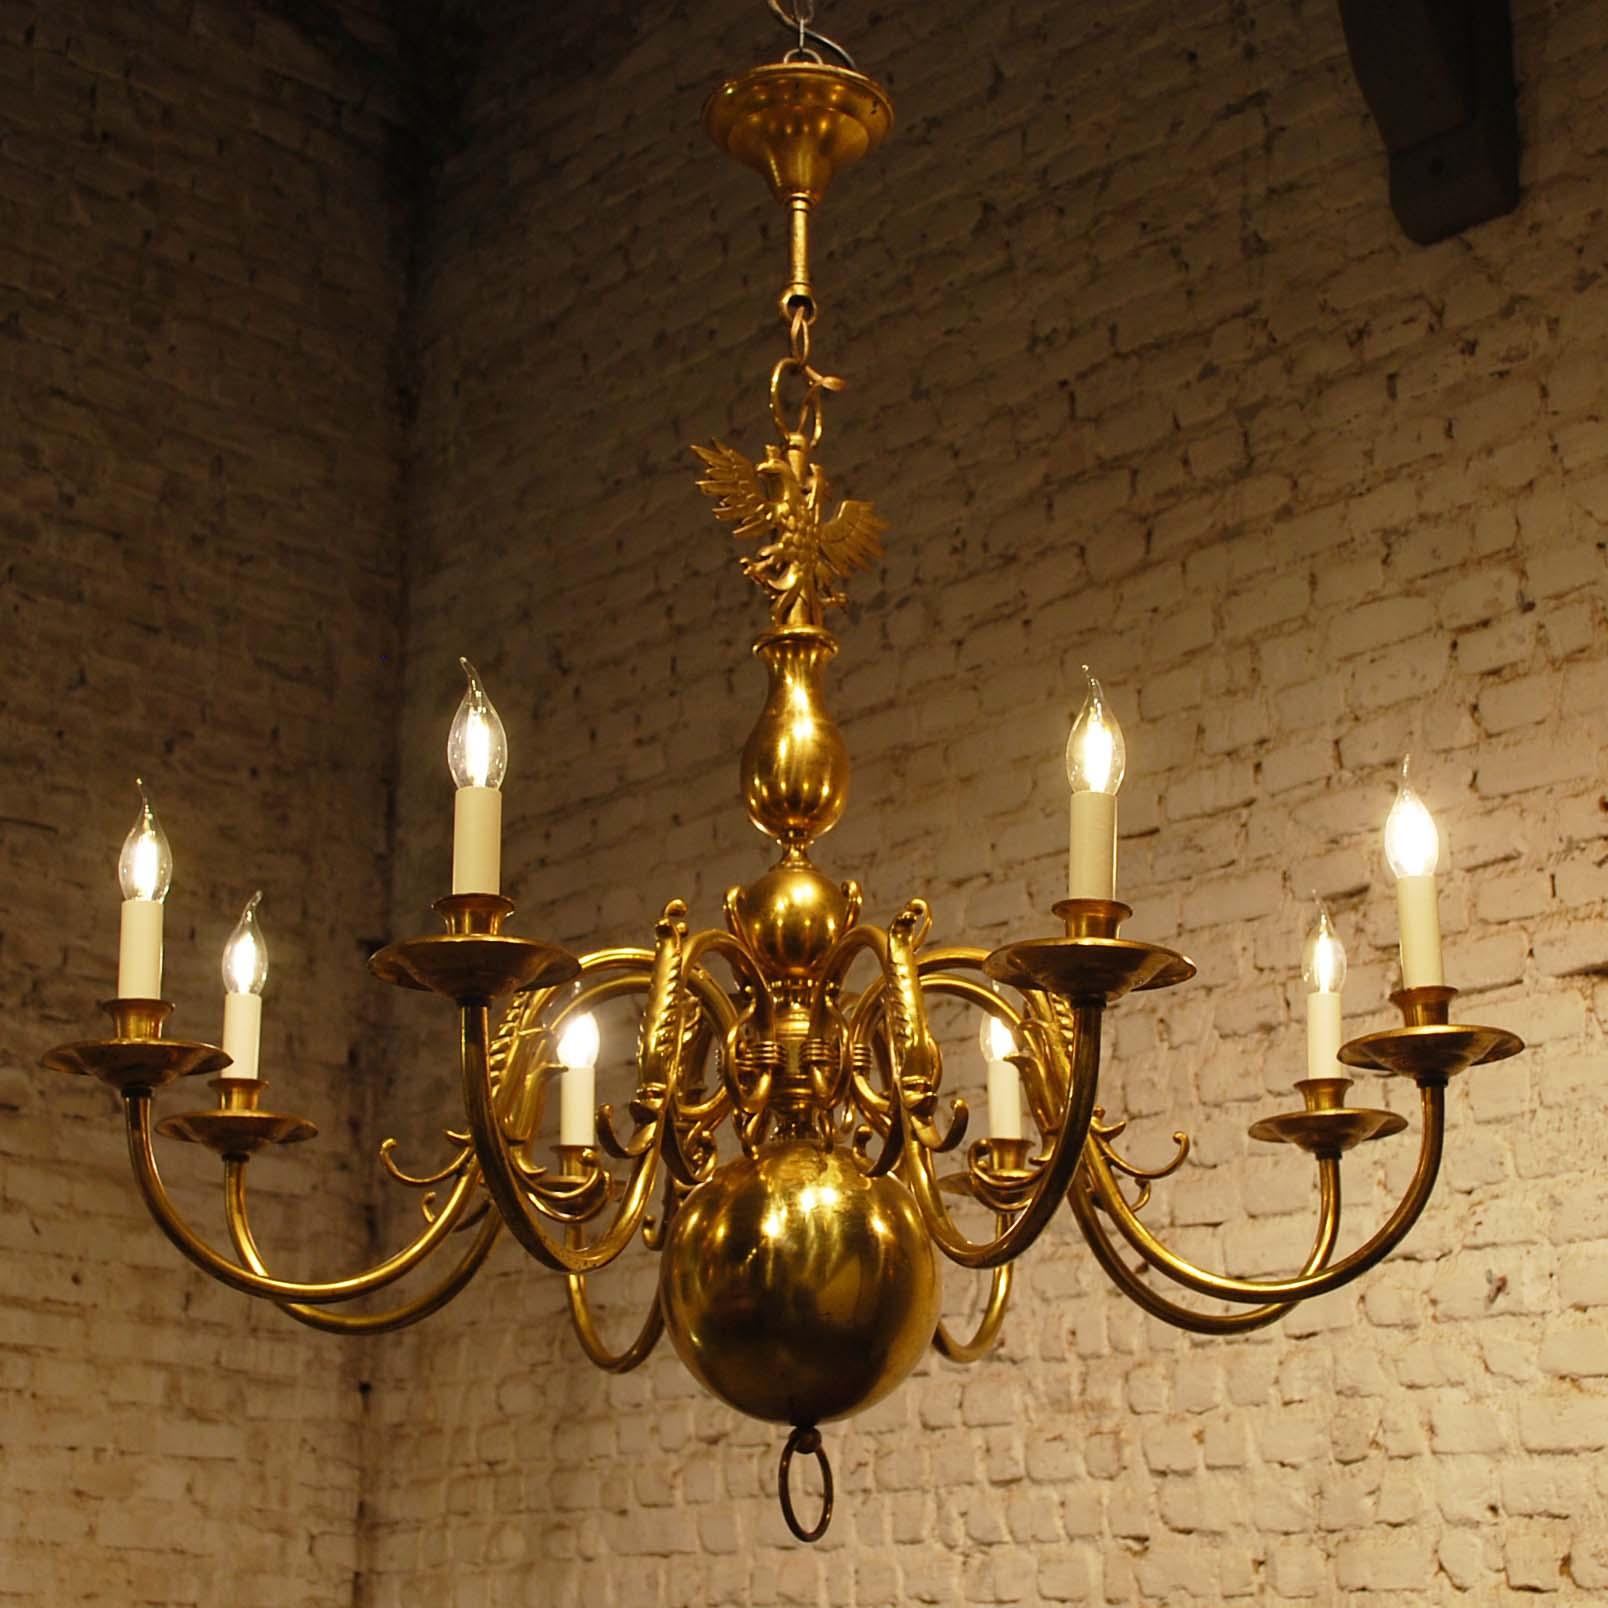 A large eight-light Baroque style brass Dutch chandelier with ball-shaped elements. 
It has eight arms that end in brass bobeches with cardboard candles on top. A bobeche is a bowl on a chandelier, sconce, or candelabra with the historical purpose